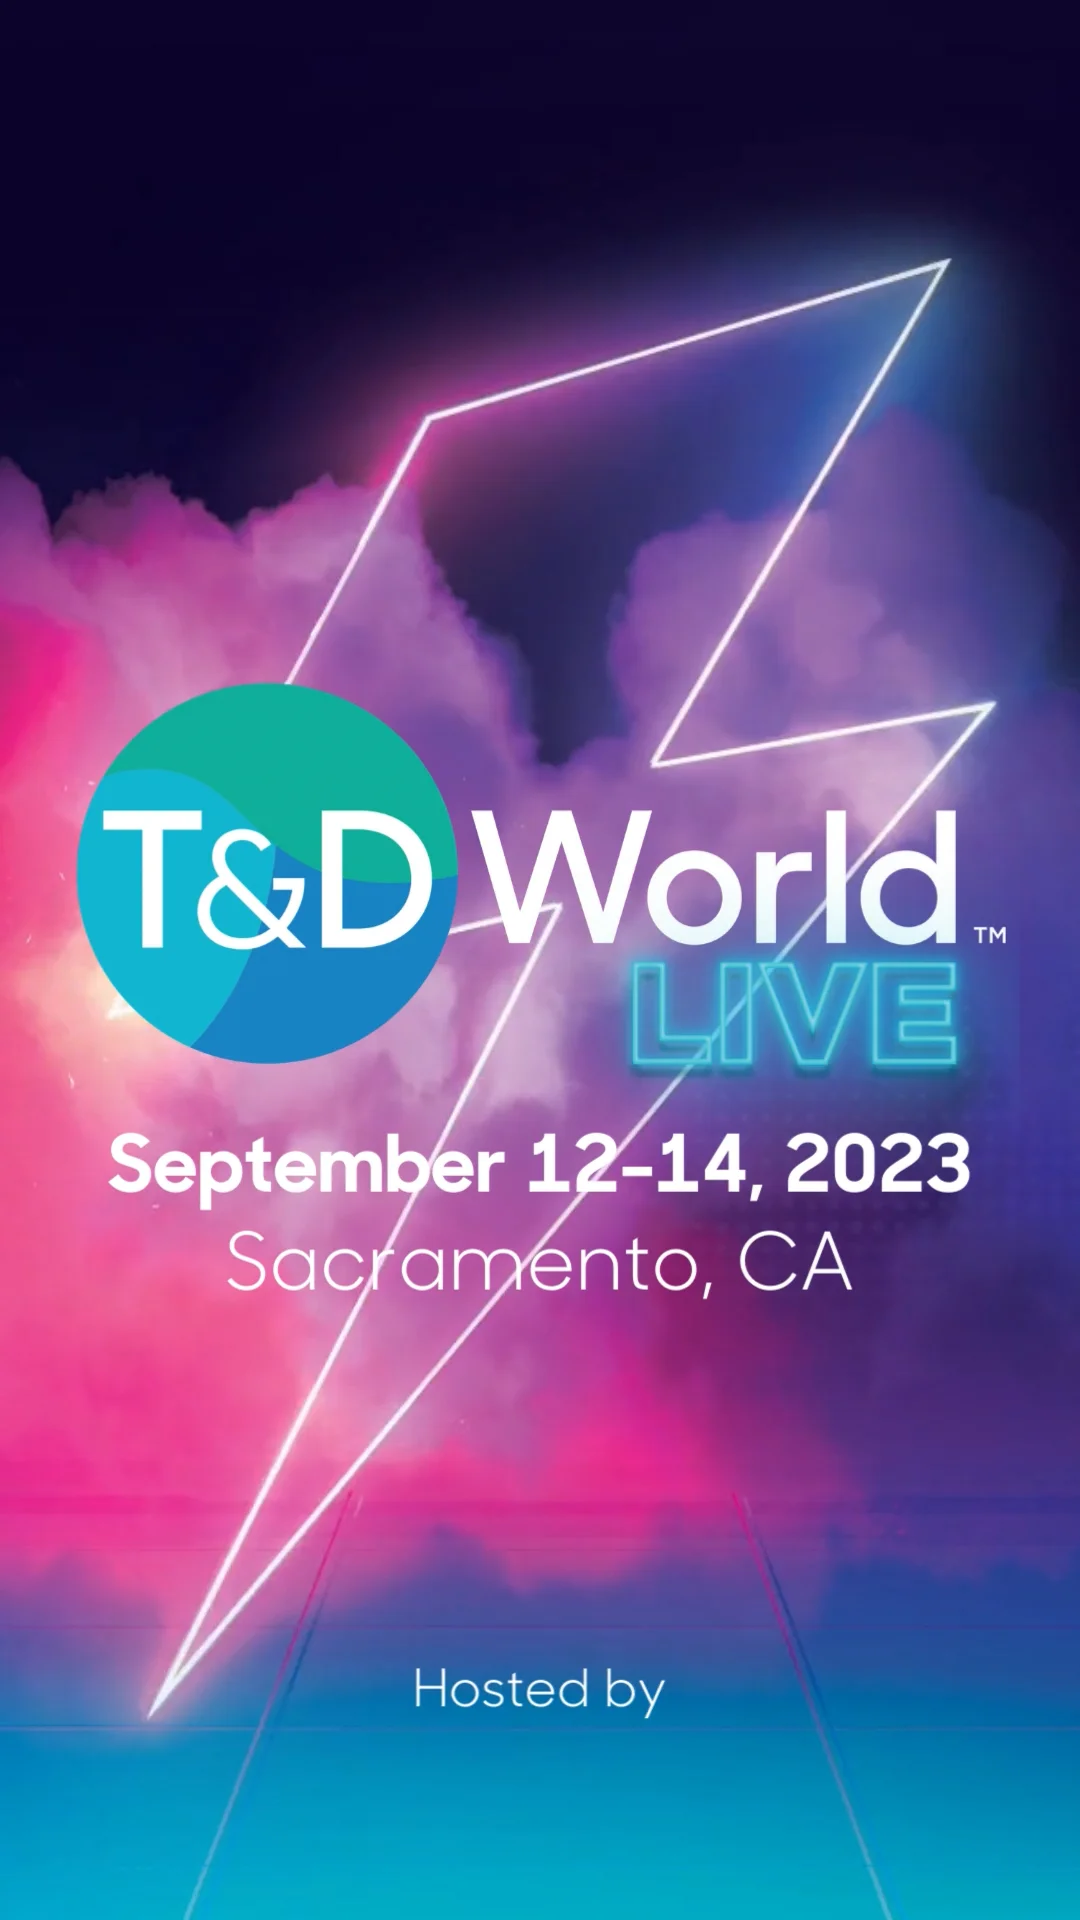 50% Underground by 2040 with Mike Beehler at T&D World Live 2023